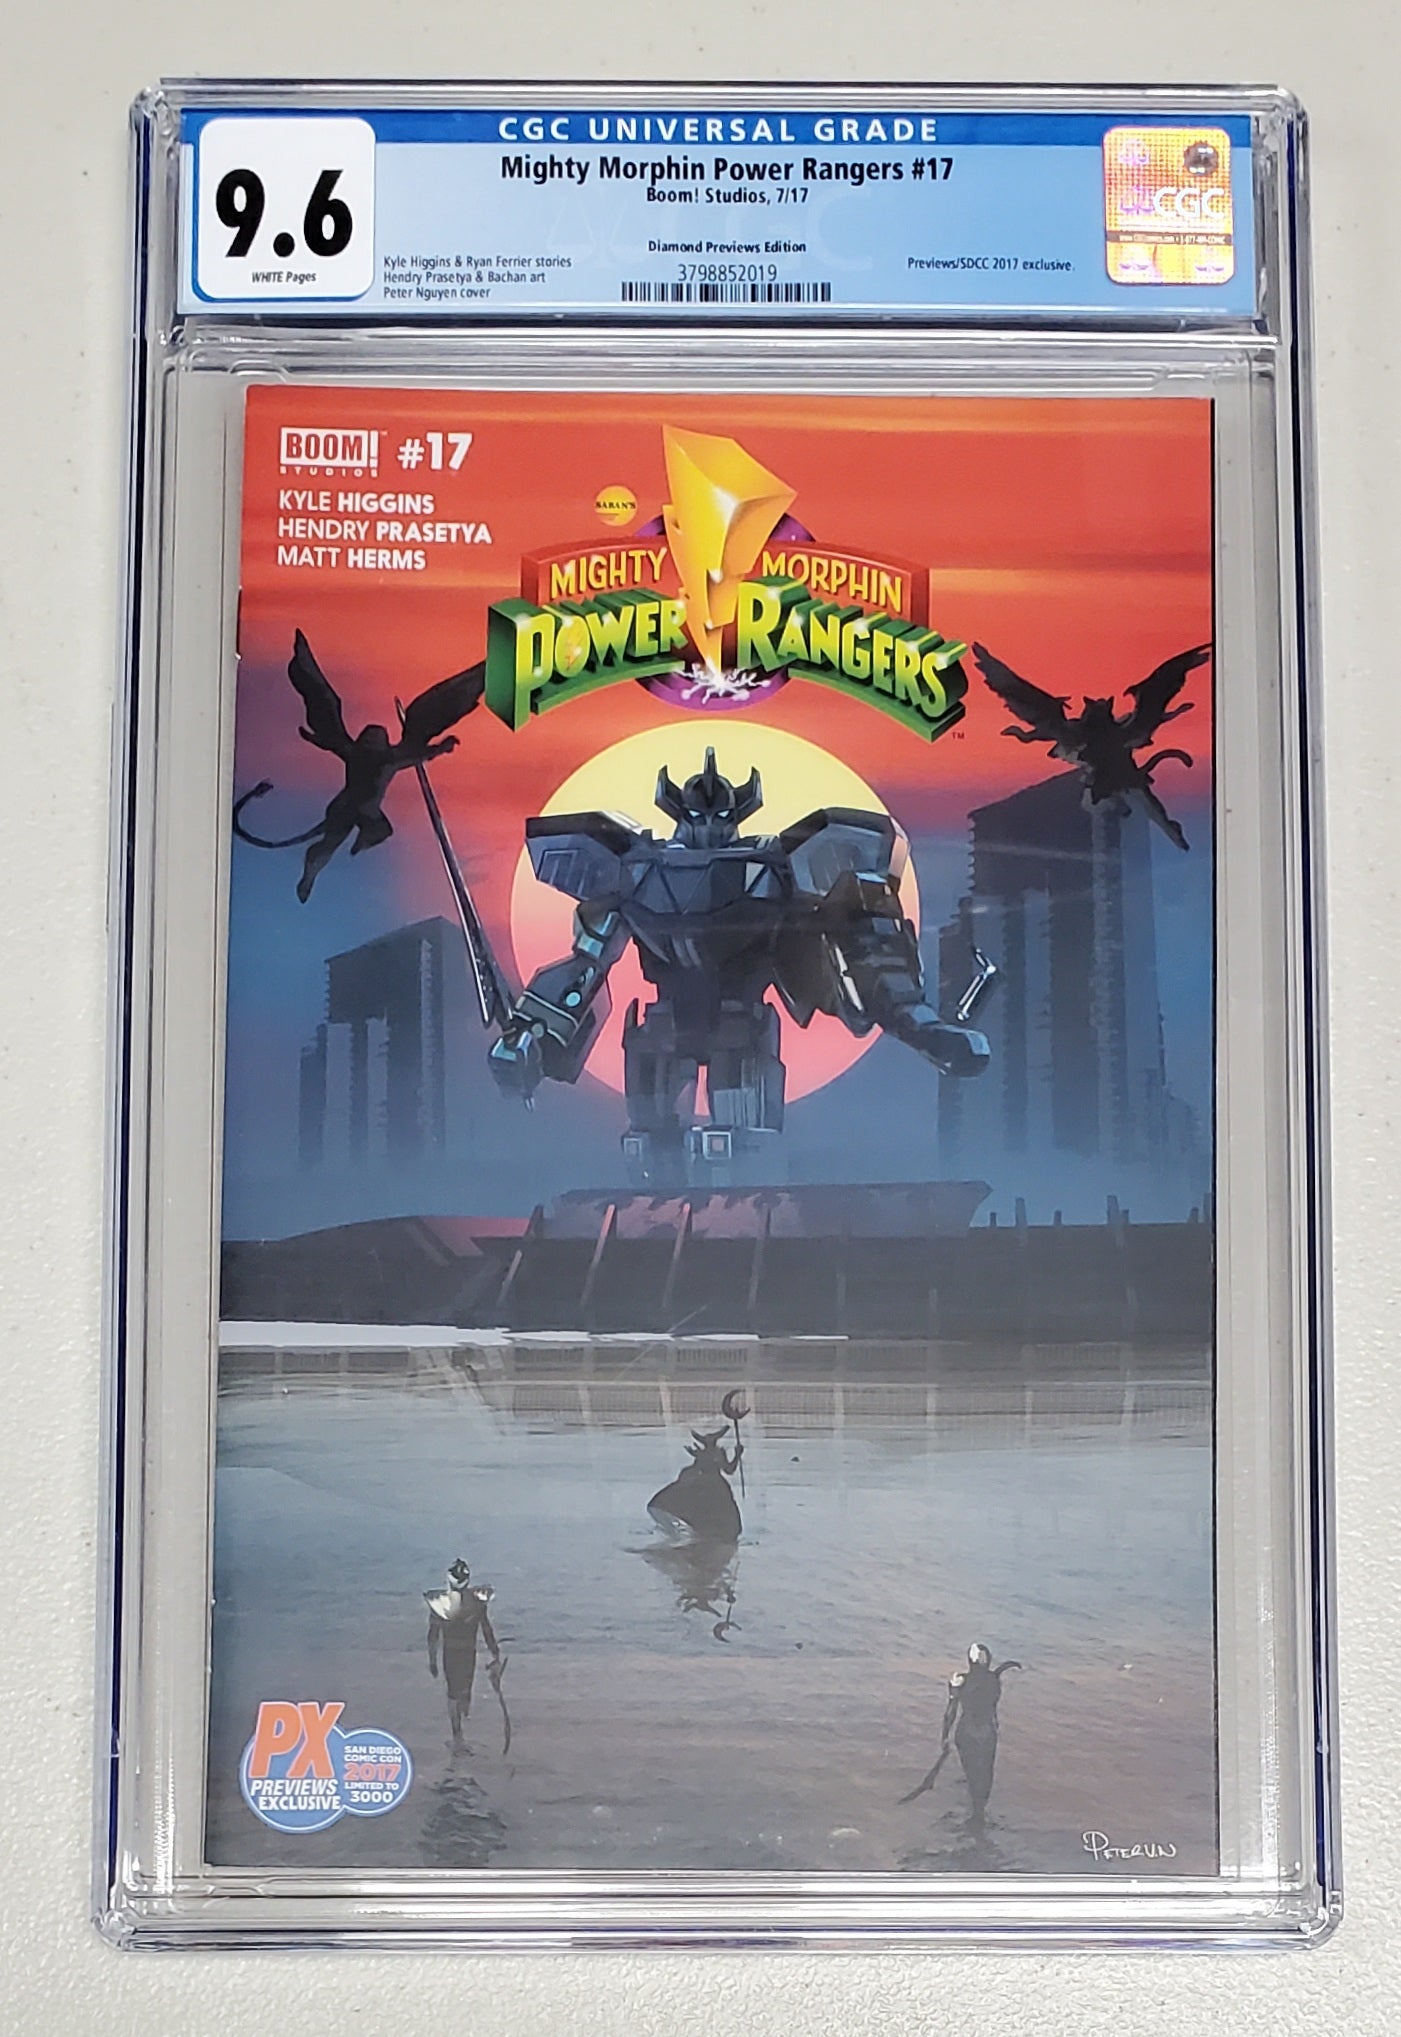 9.6 CGC MIGHTY MORPHIN POWER RANGERS #17 PX SDCC 2017 EXCLUSIVE VARIANT [3798852019]